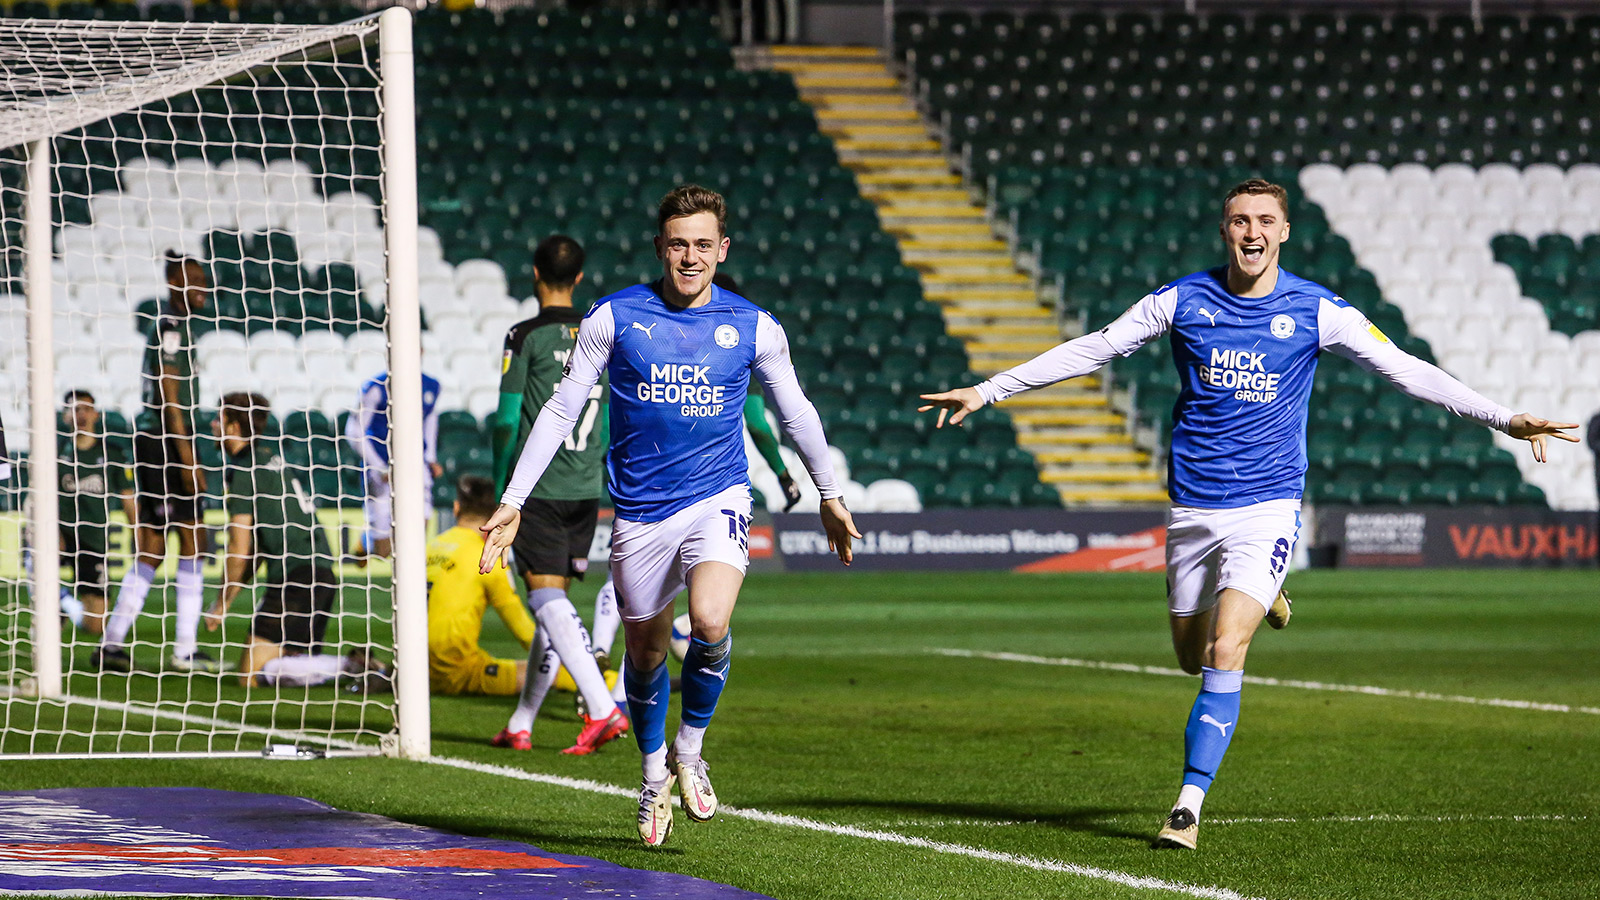 23rd February '21 | Sammie Szmodics and Jack Taylor find the camera during the impressive 3-0 away win at Plymouth Argyle